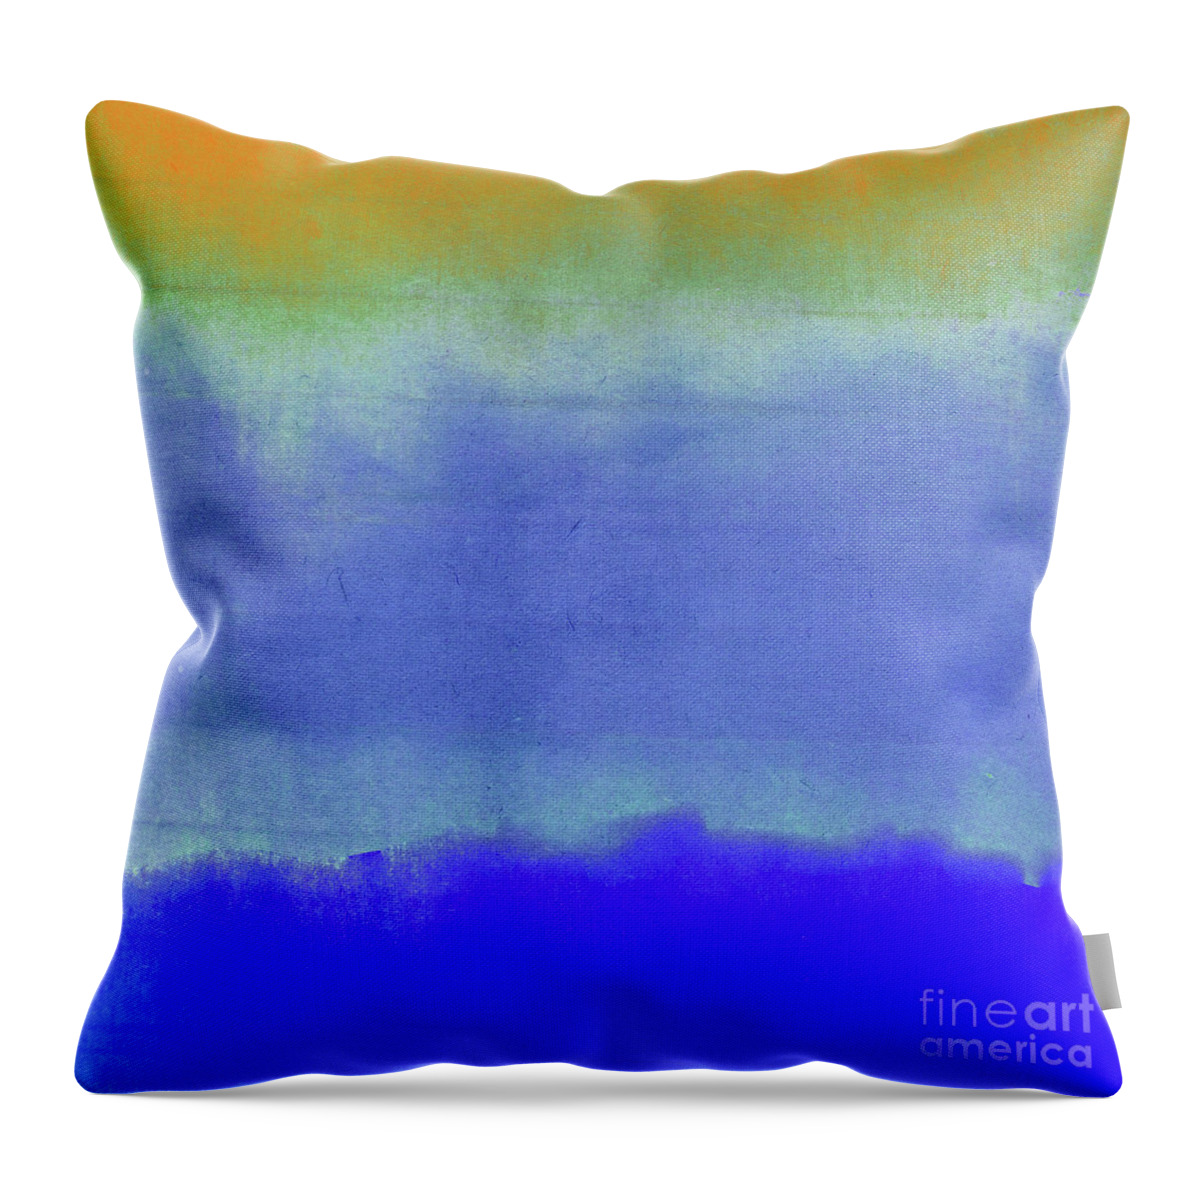 Gradients Throw Pillow featuring the painting Gradients IV by Mindy Sommers